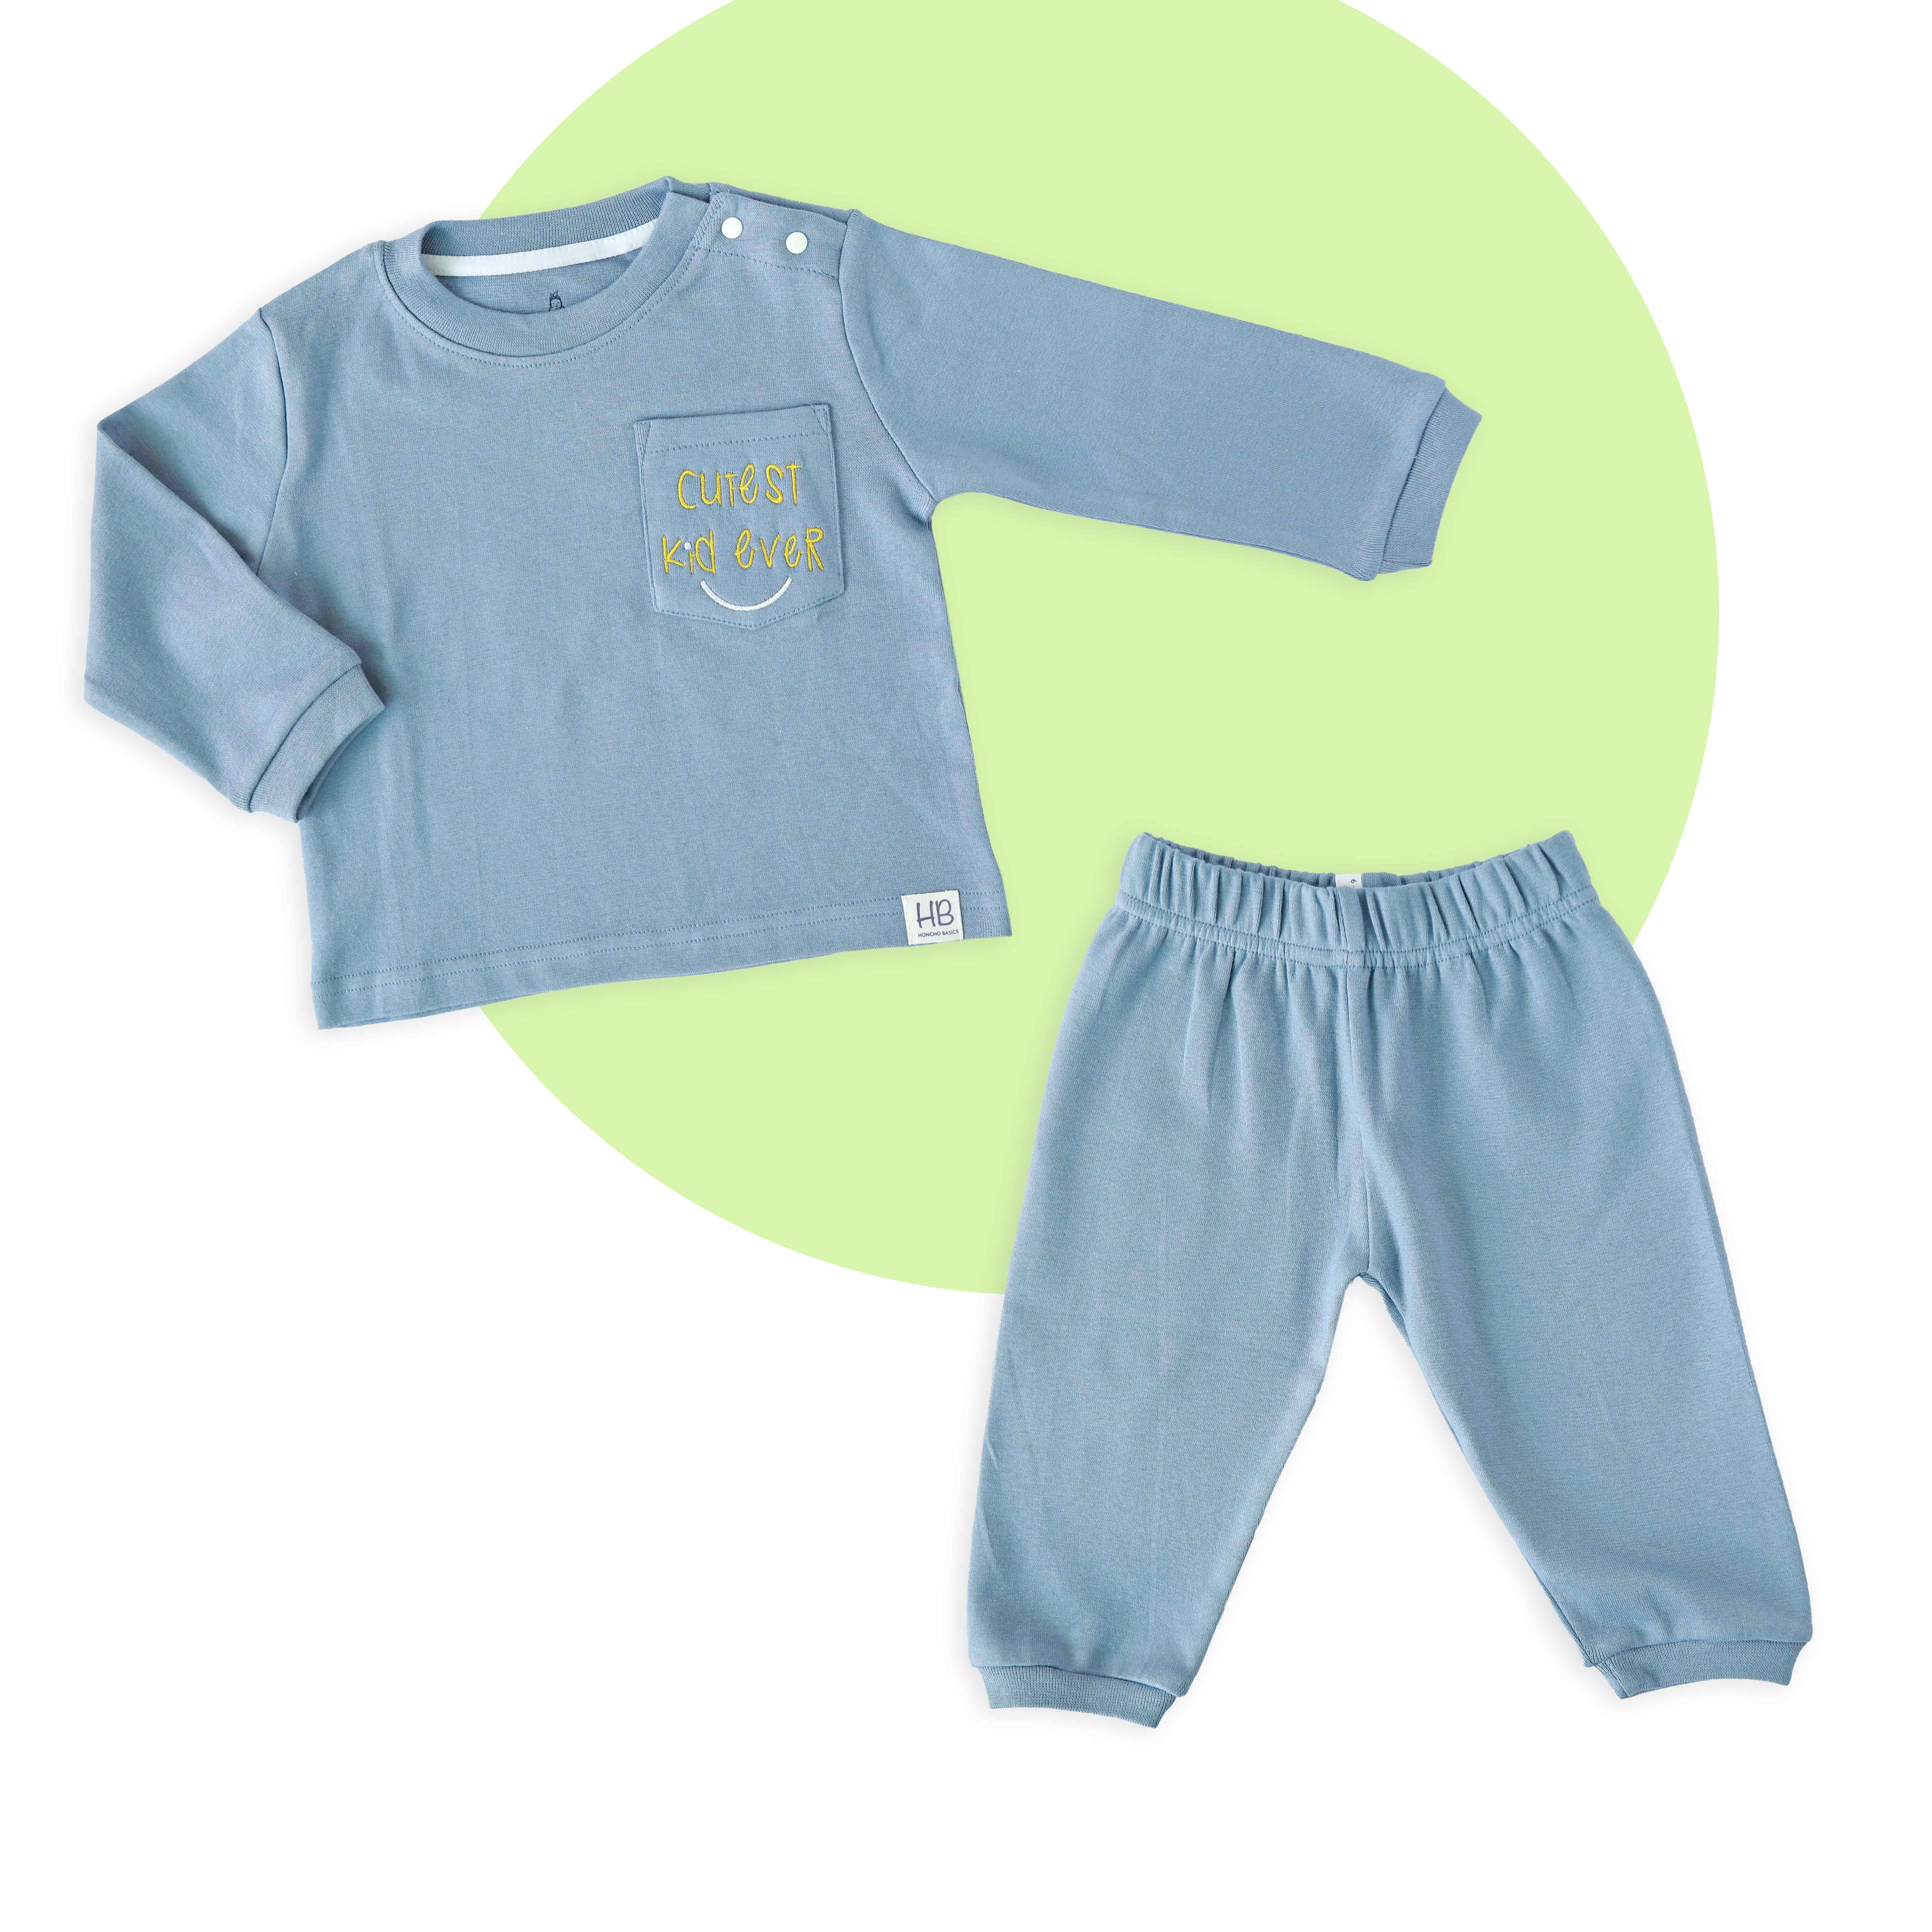 Cutest Kid Ever - Round Neck Full Sleeve Top and Pant ( 0 - 4 years ) 1 Pack